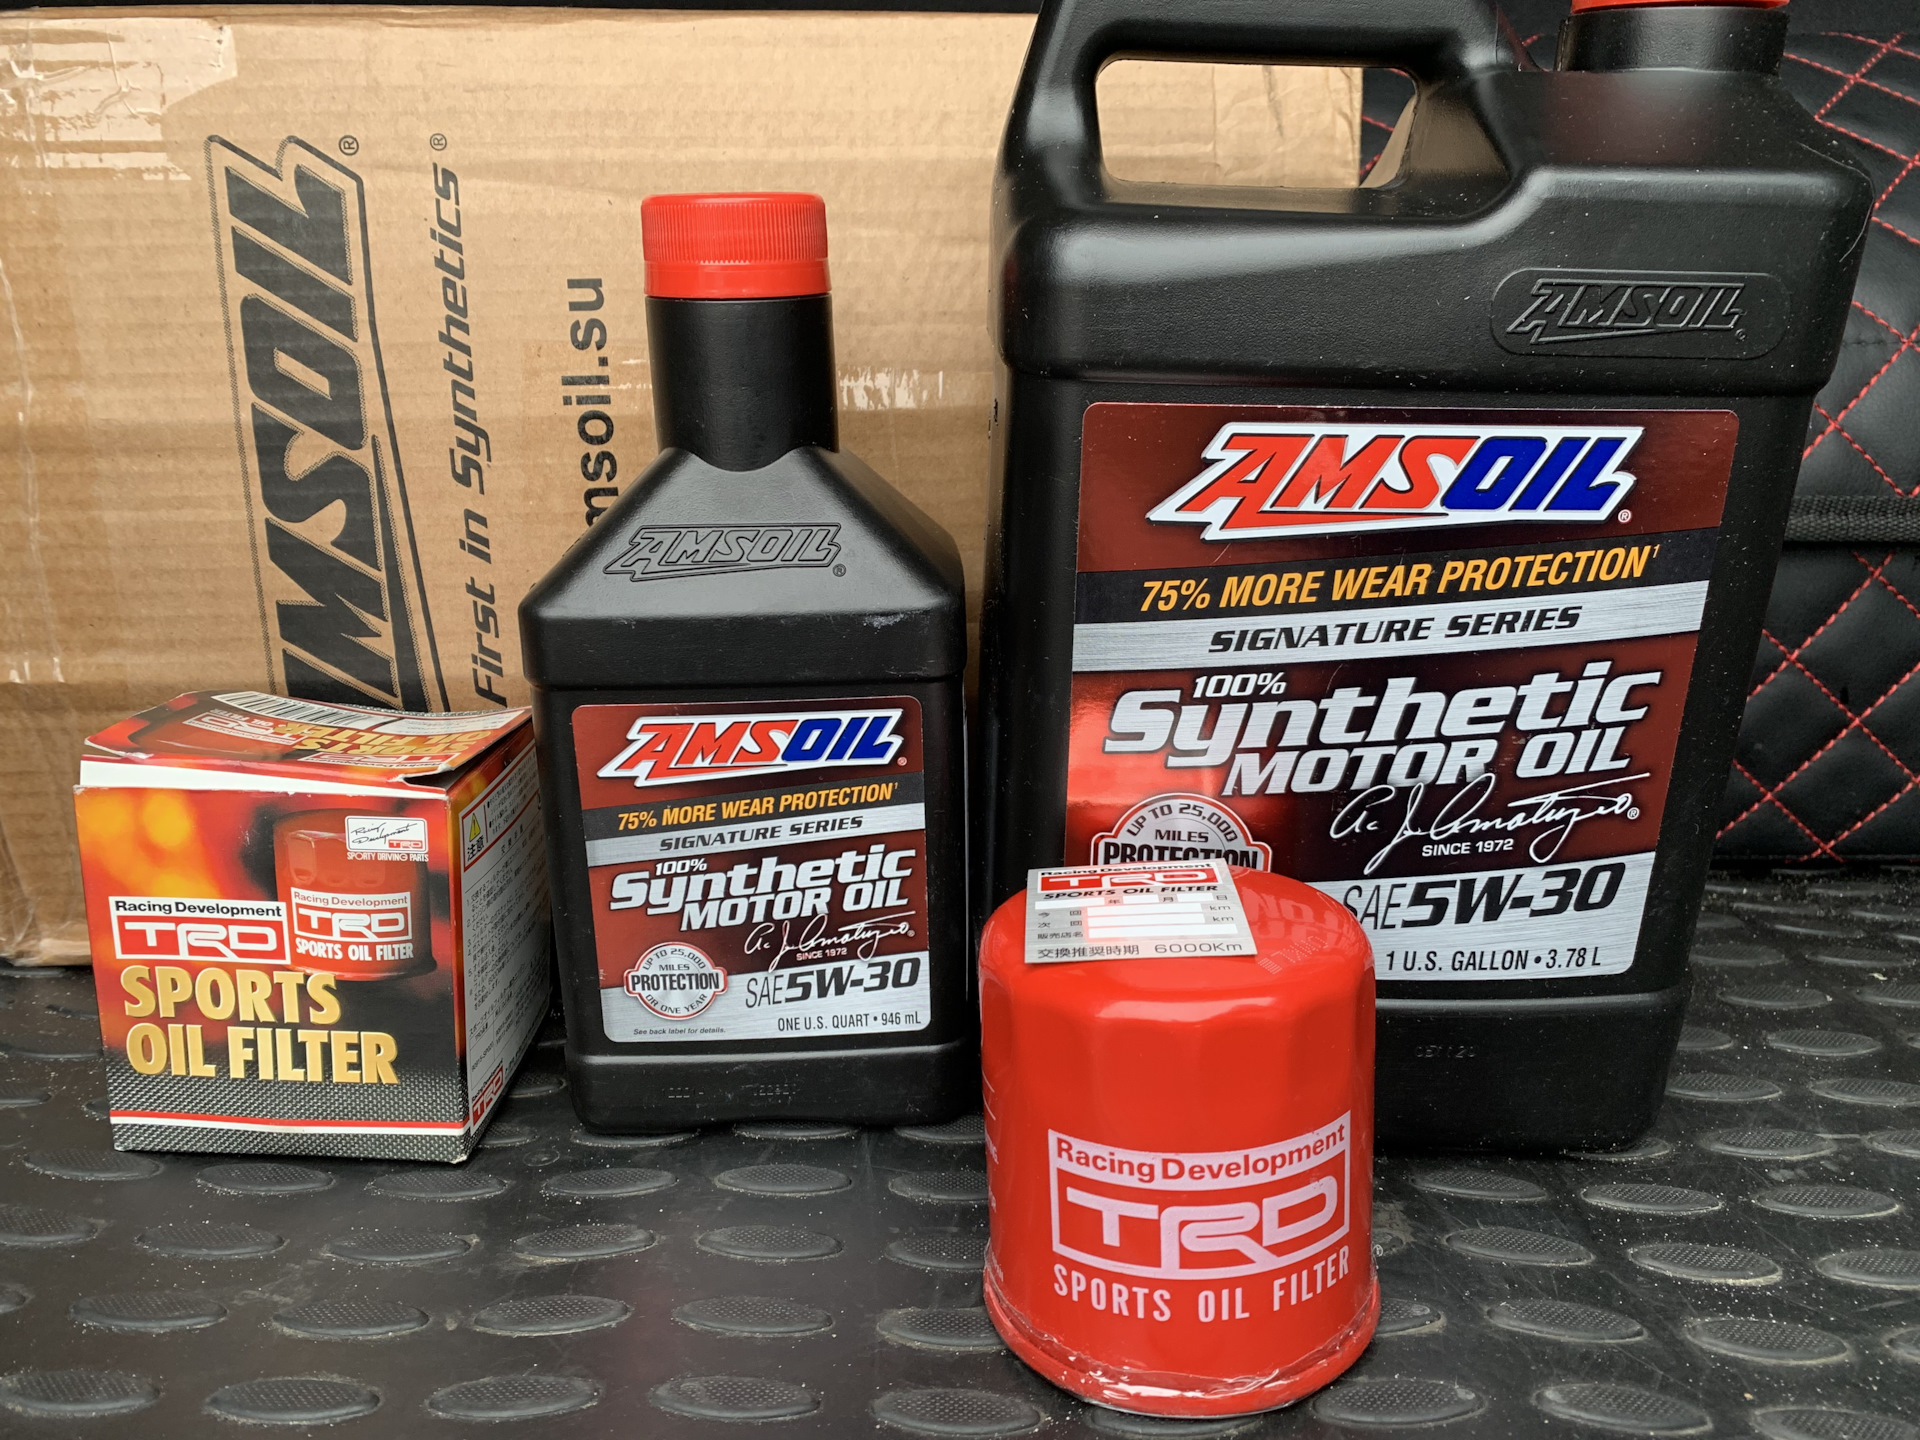 Signature series synthetic. AMSOIL 5w30. Масло AMSOIL 5w30. AMSOIL g3506s. AMSOIL Signature Series 5w-30.